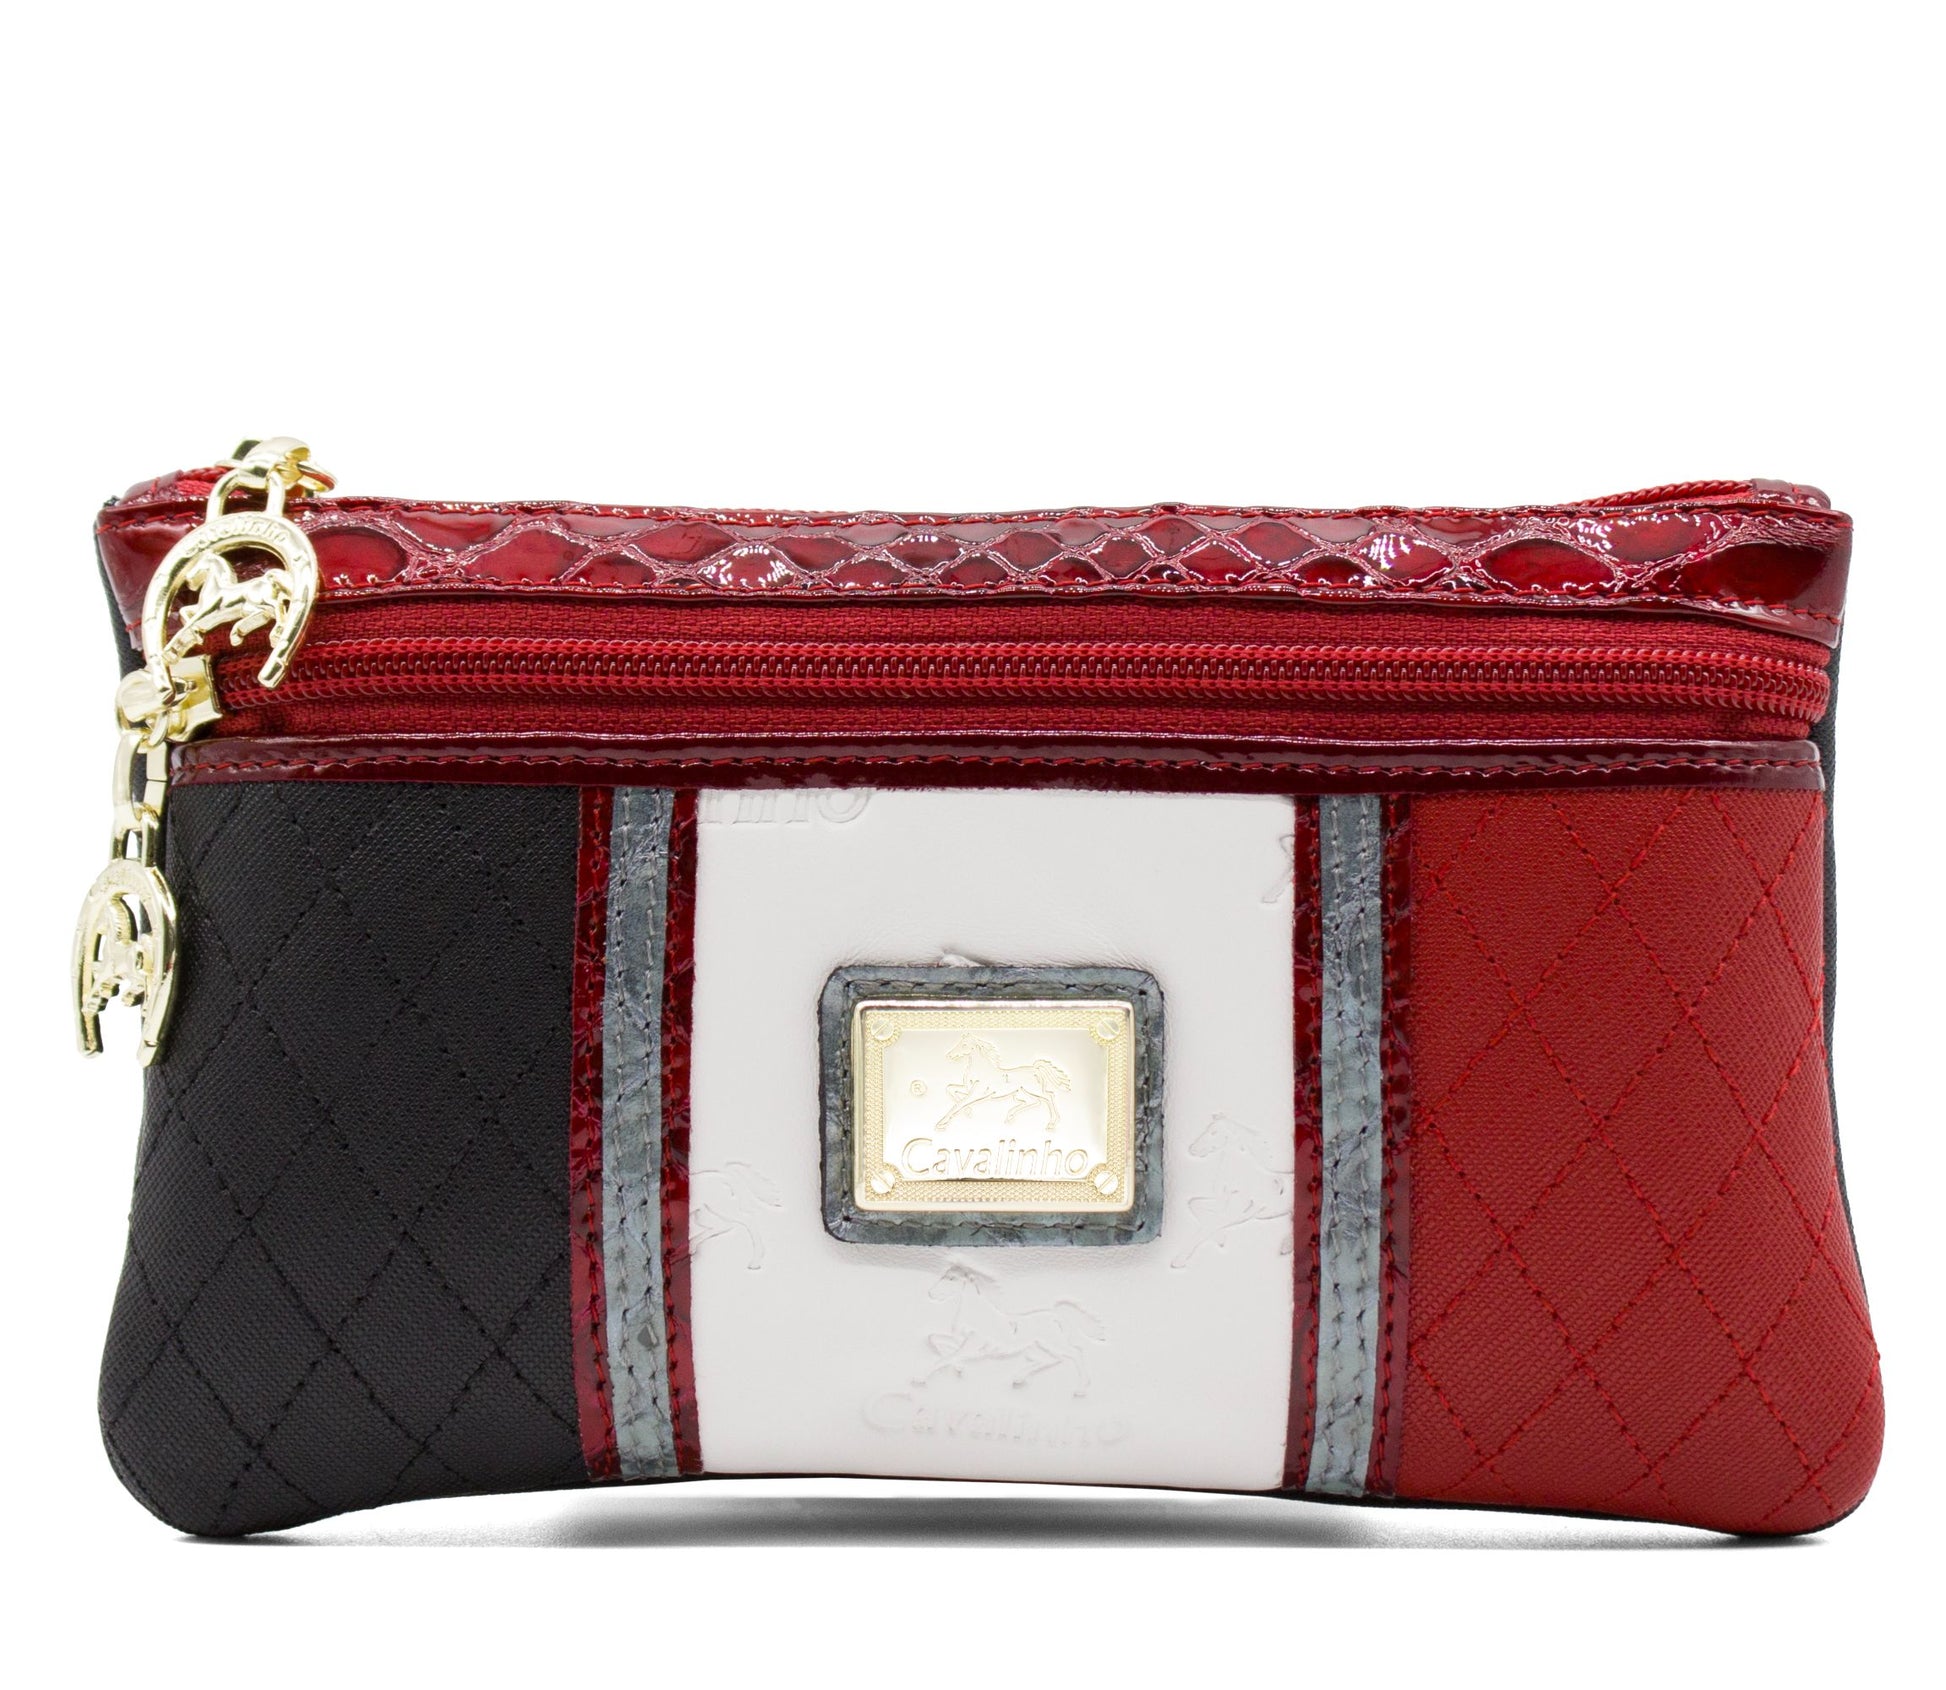 Cavalinho Royal Cosmetic Case - Black / White / Red / Silver - 28390256.23_1